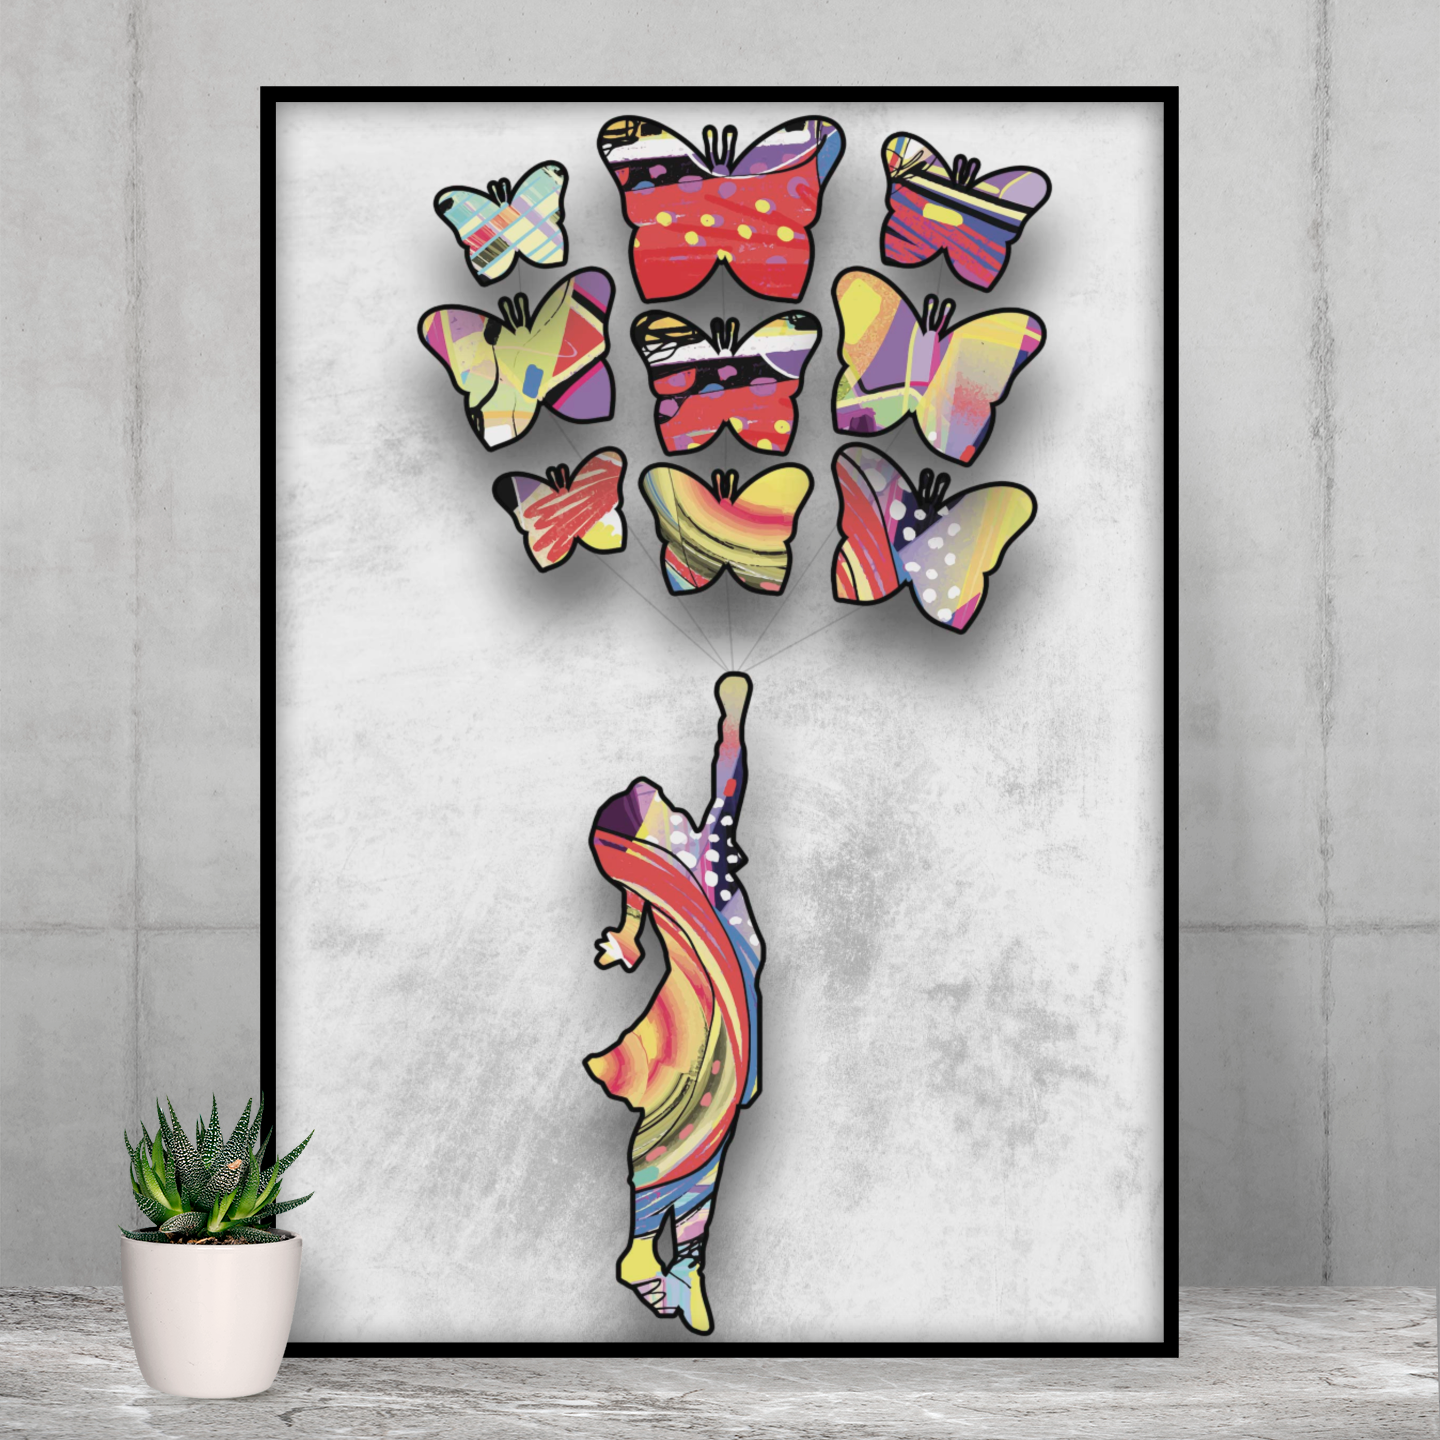 Inspired By Flying Butterflies Framed Print